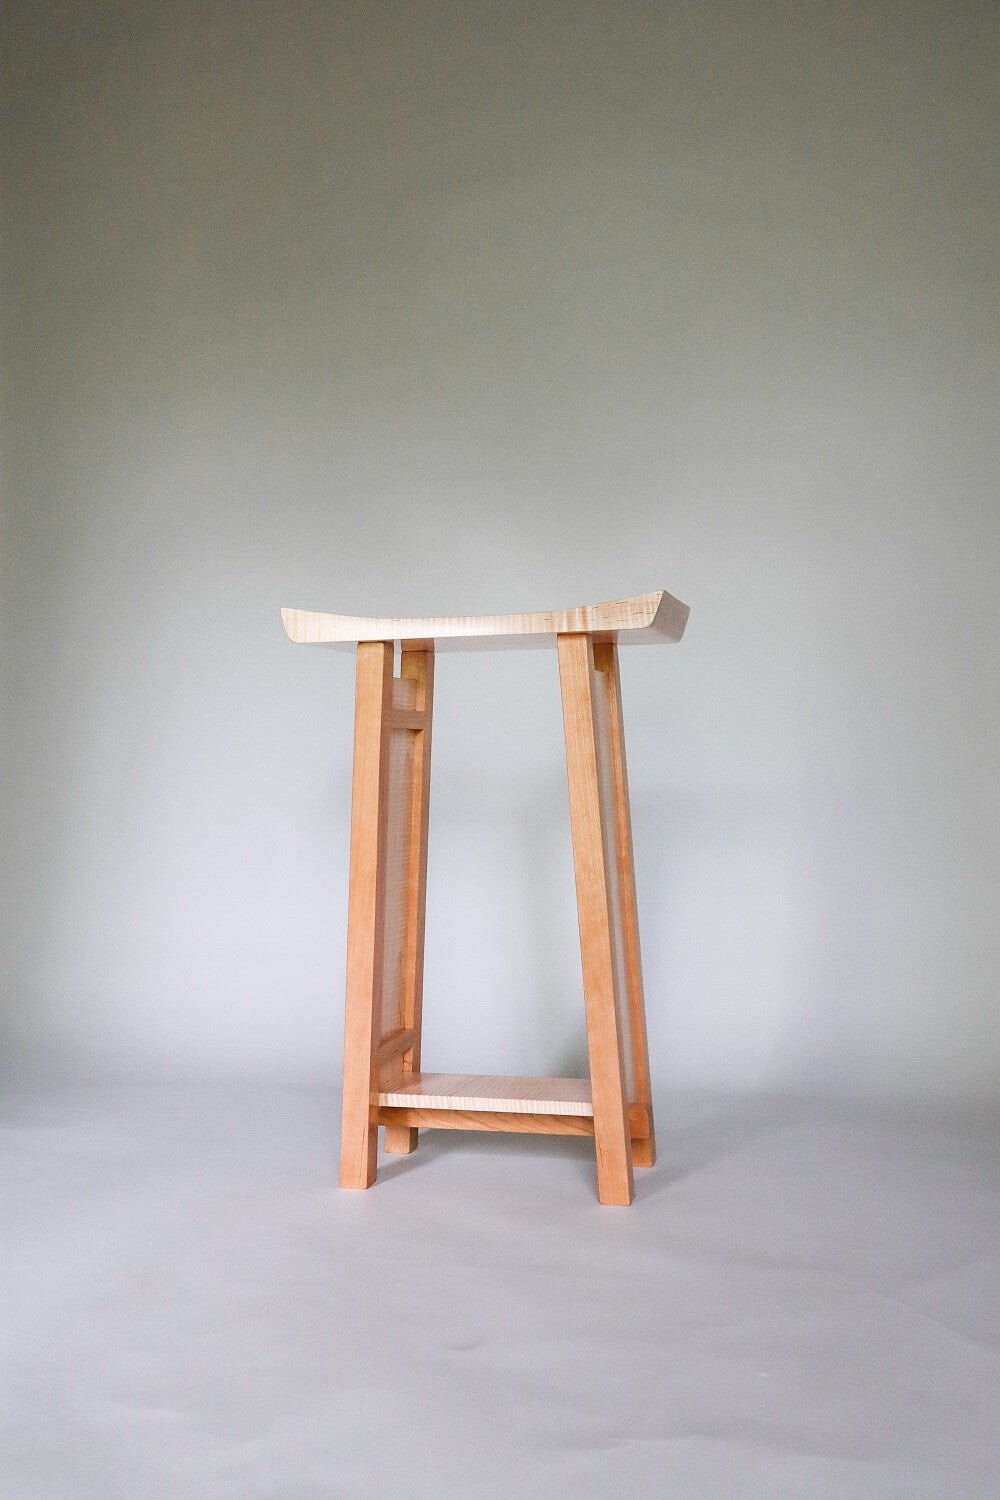 An artistic side table with a unique shape and narrow size - modern furniture designs by Mokuzai Furniture